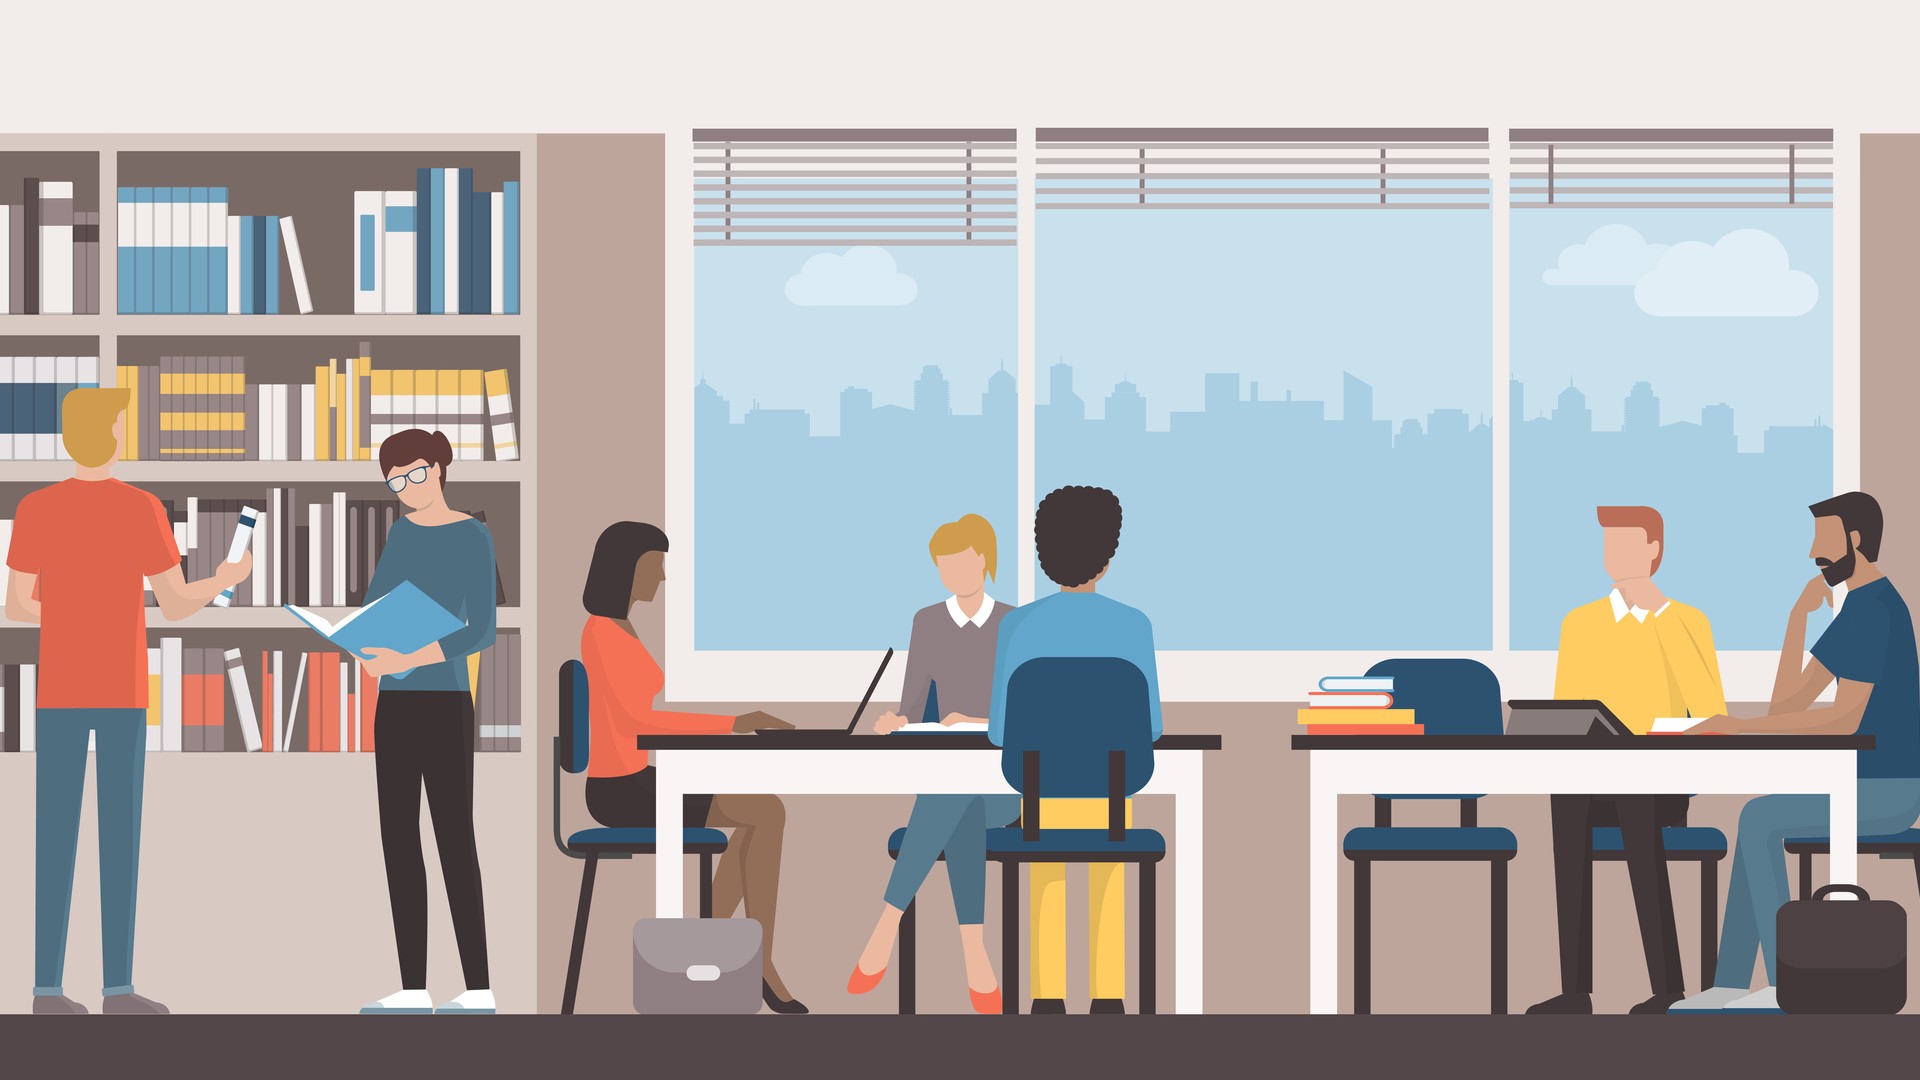 Illustration shows a group of people working in a library setting. Some people are working at desks with laptops open, others are browsing for books and reading.